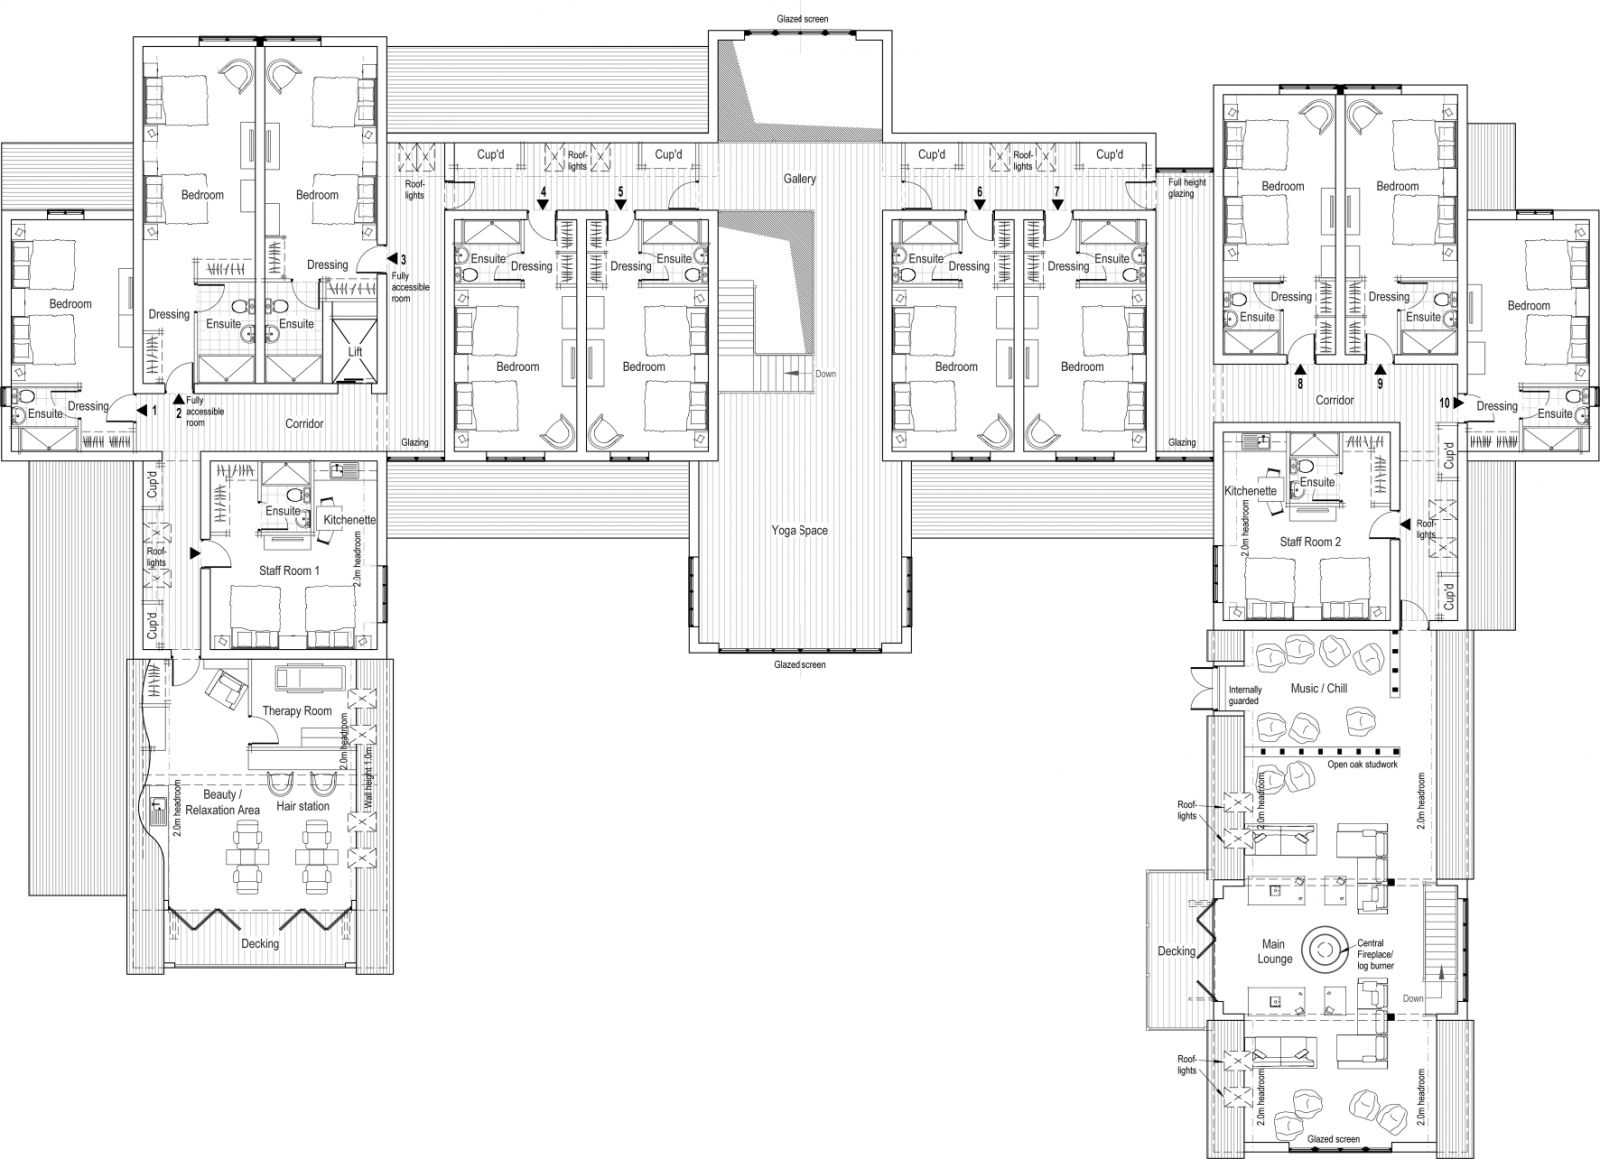 Proposed plans for the ground floor of The House of Teens Unite